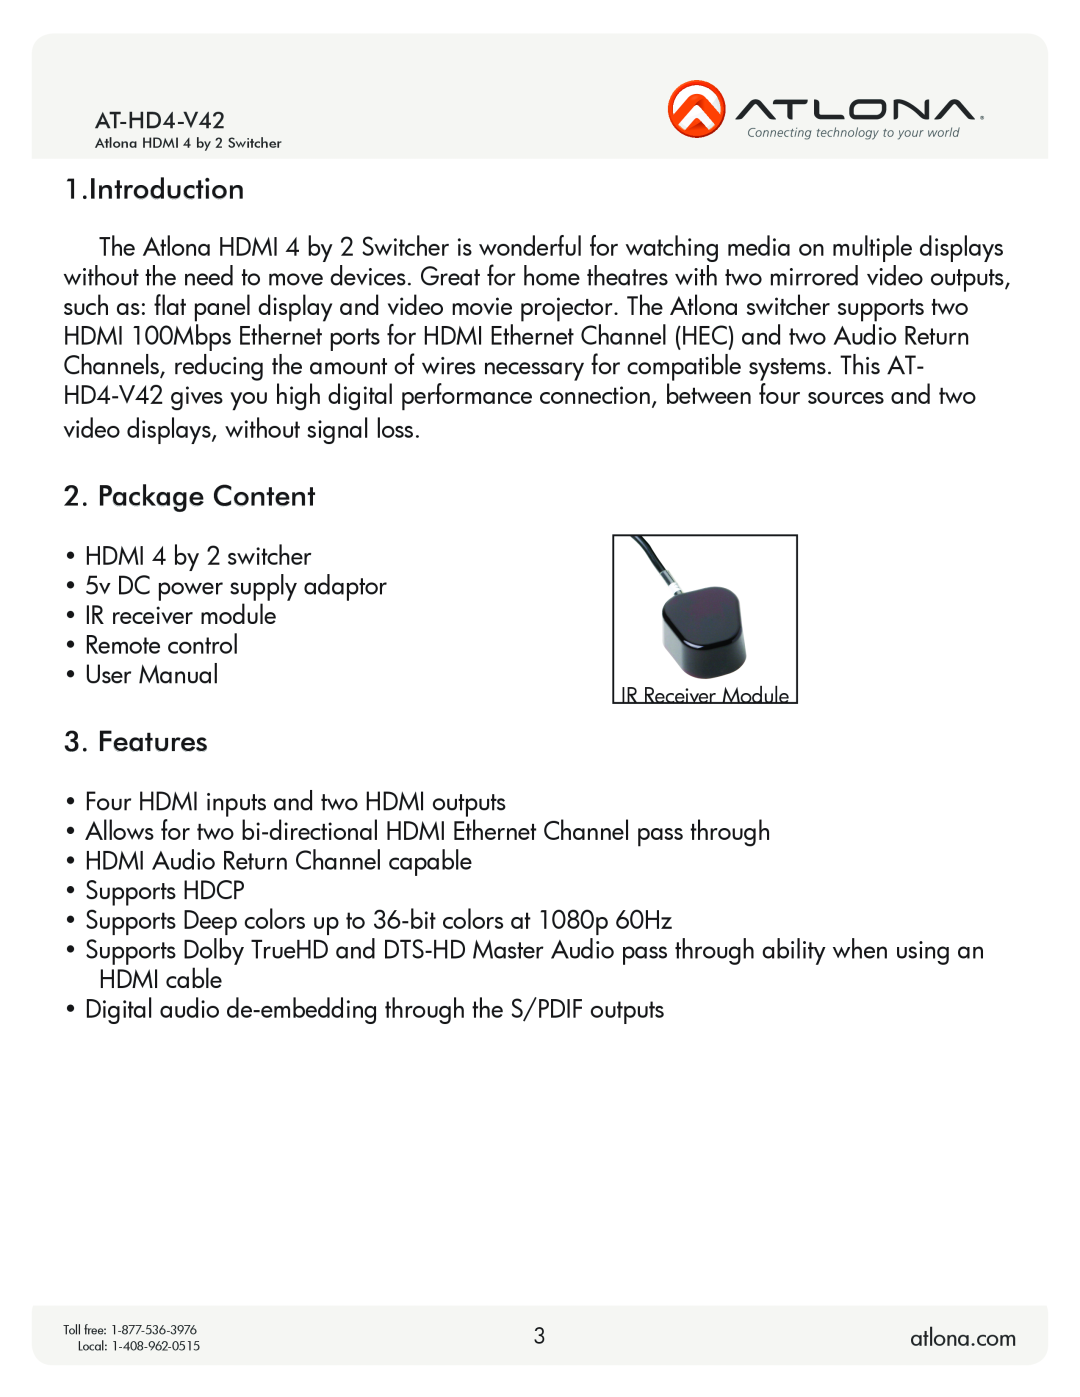 Atlona AT-HD4-V42 user manual Introduction, Package Content, Features 